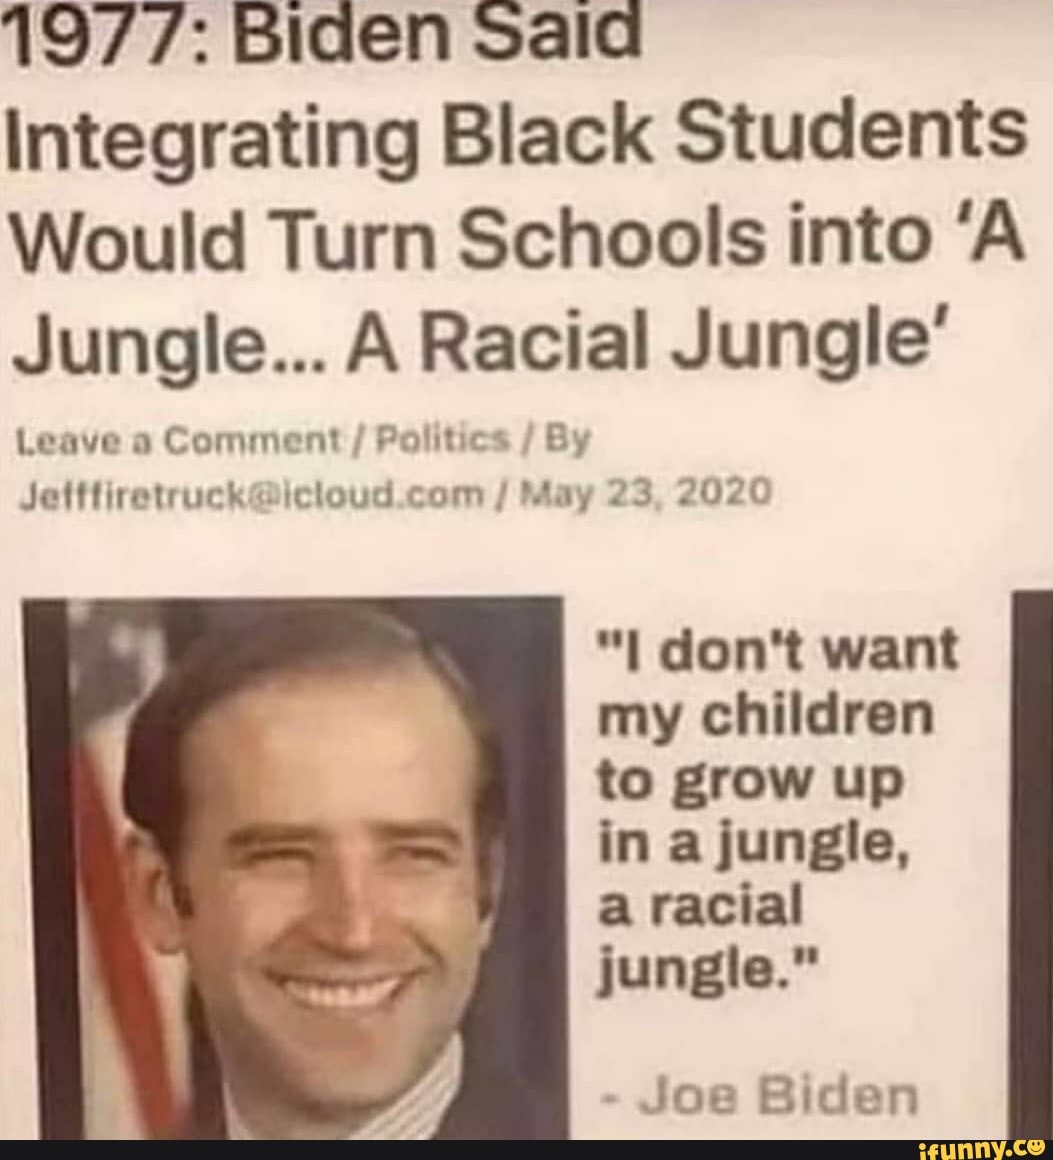 1977: Biden Sala Integrating Black Students Would Turn Schools into 'A  Jungle... A Racial Jungle' Leave a Comment Politics  Jetffiretruck@icloud.com May 23, 2020 "I don't want my children to grow up  in